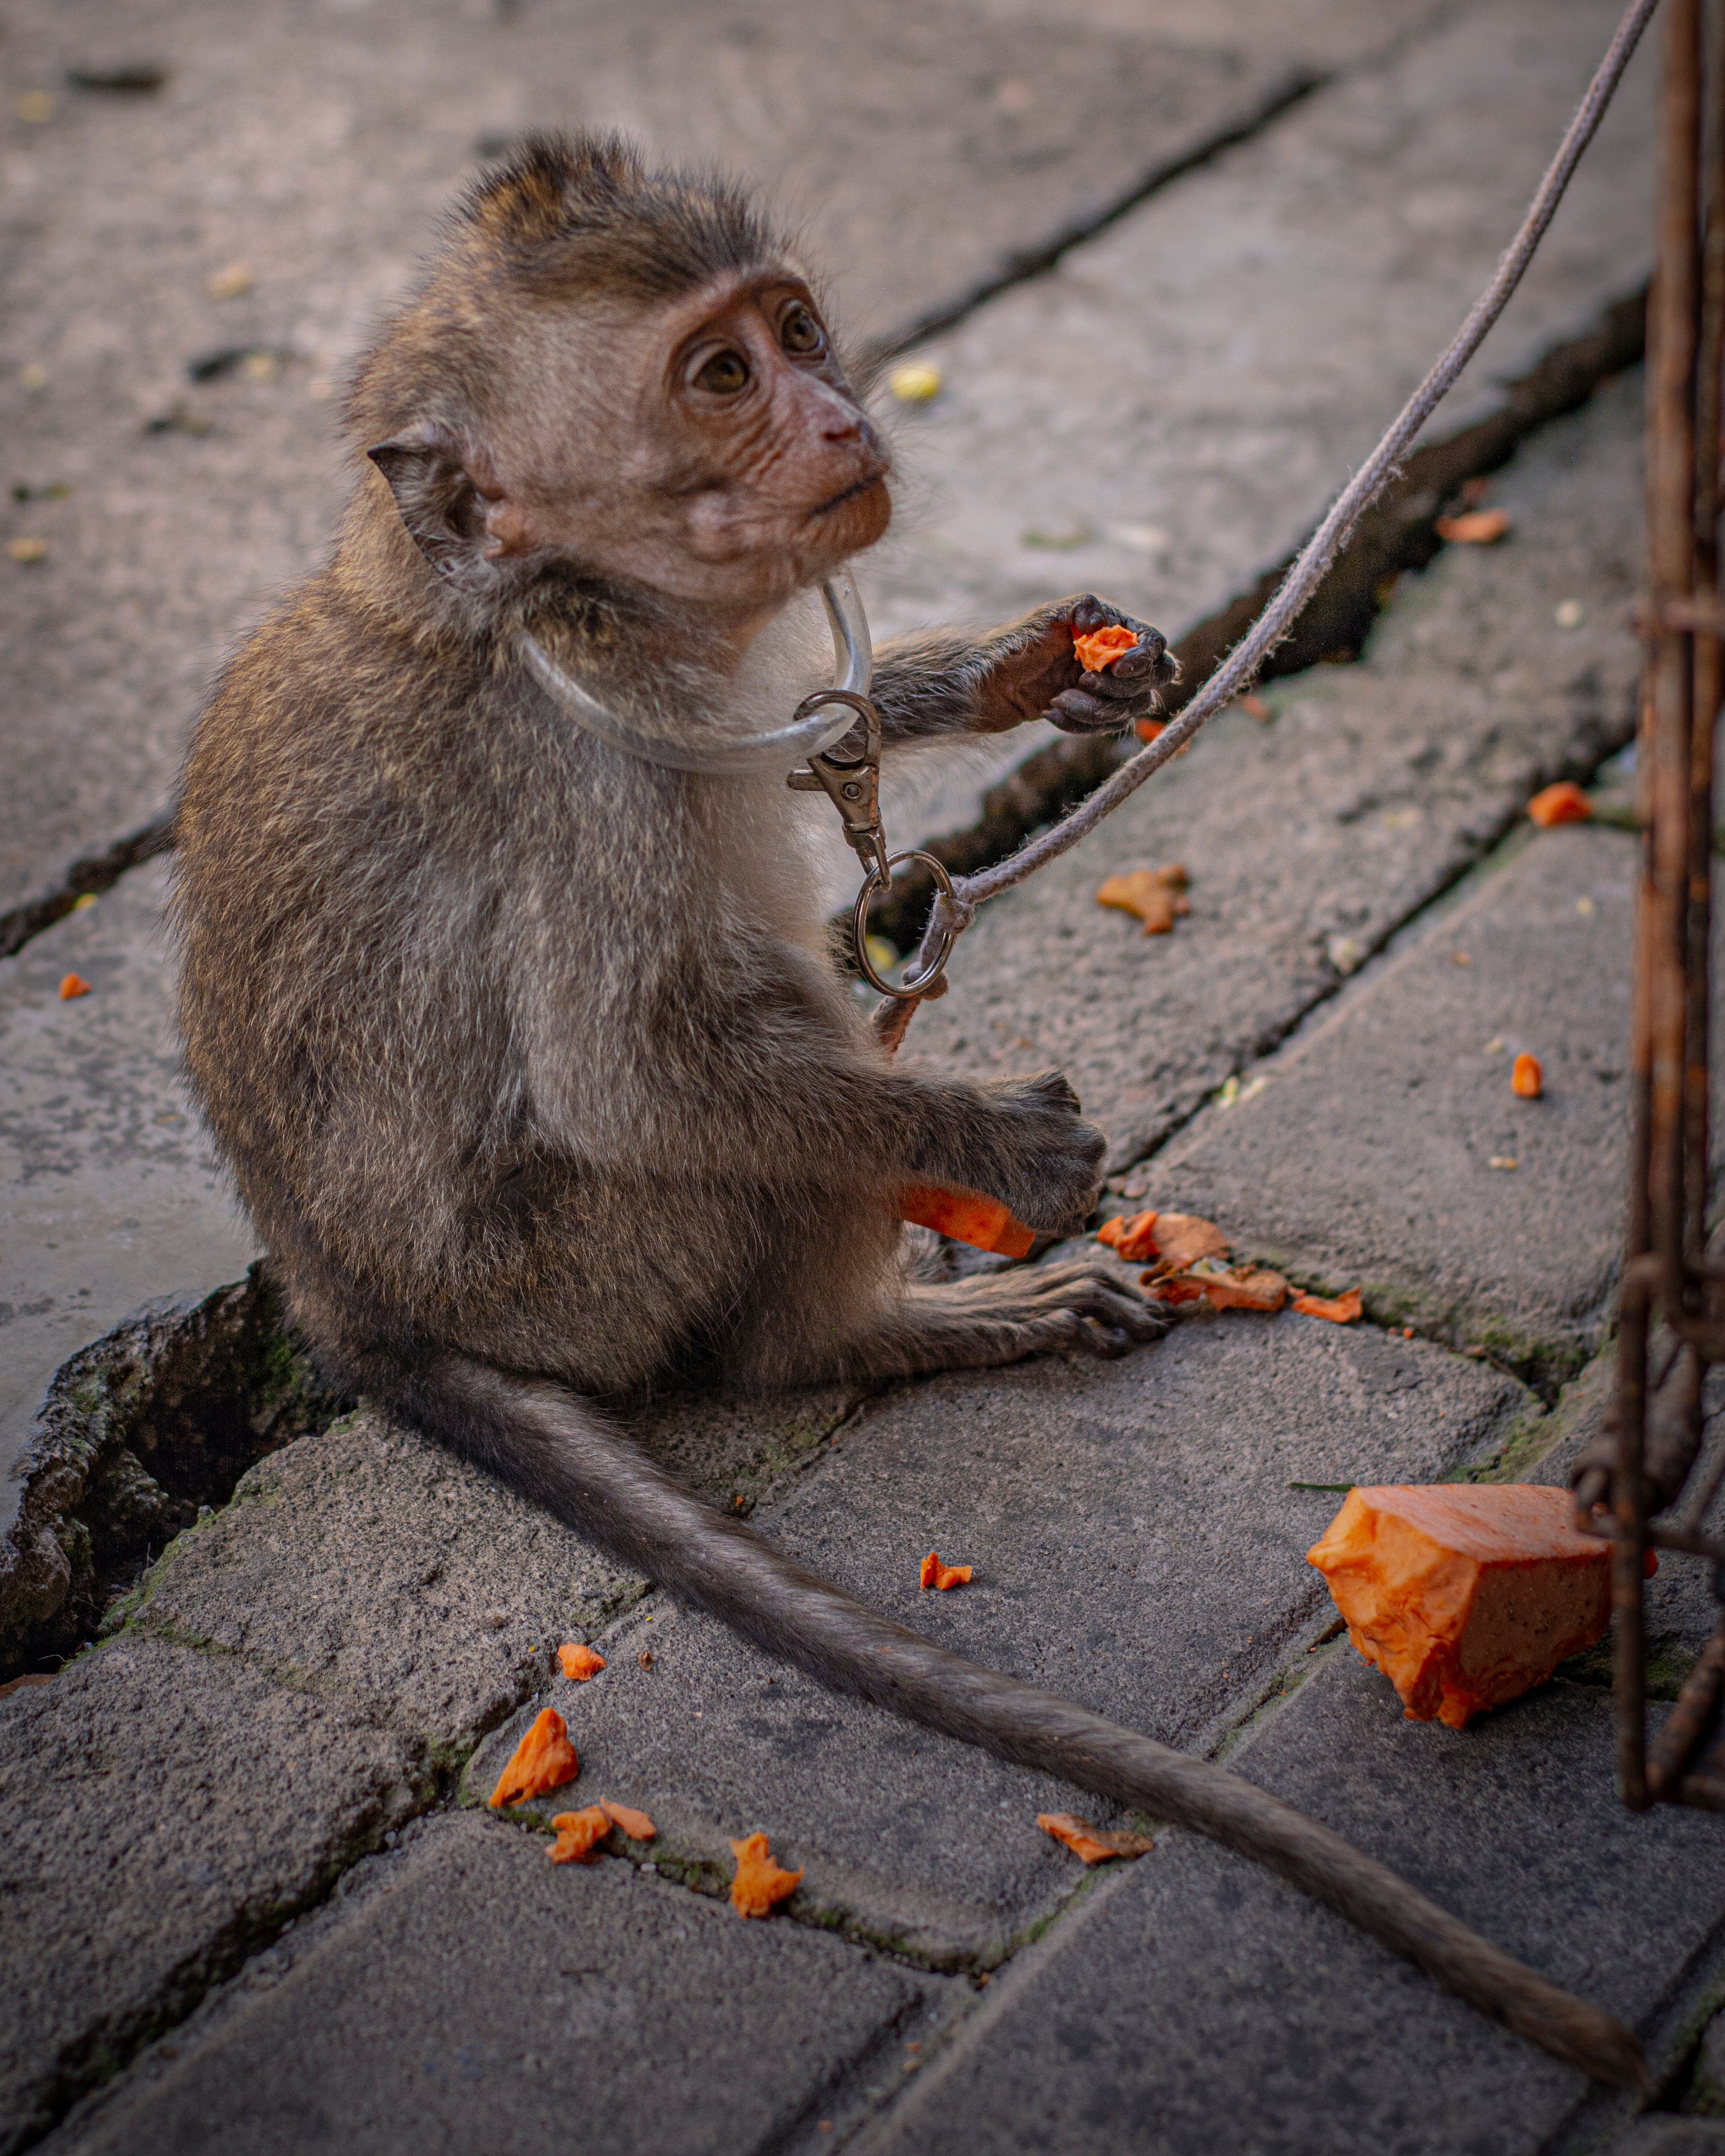 Members of social media groups share images and videos of monkeys that are chained and tortured